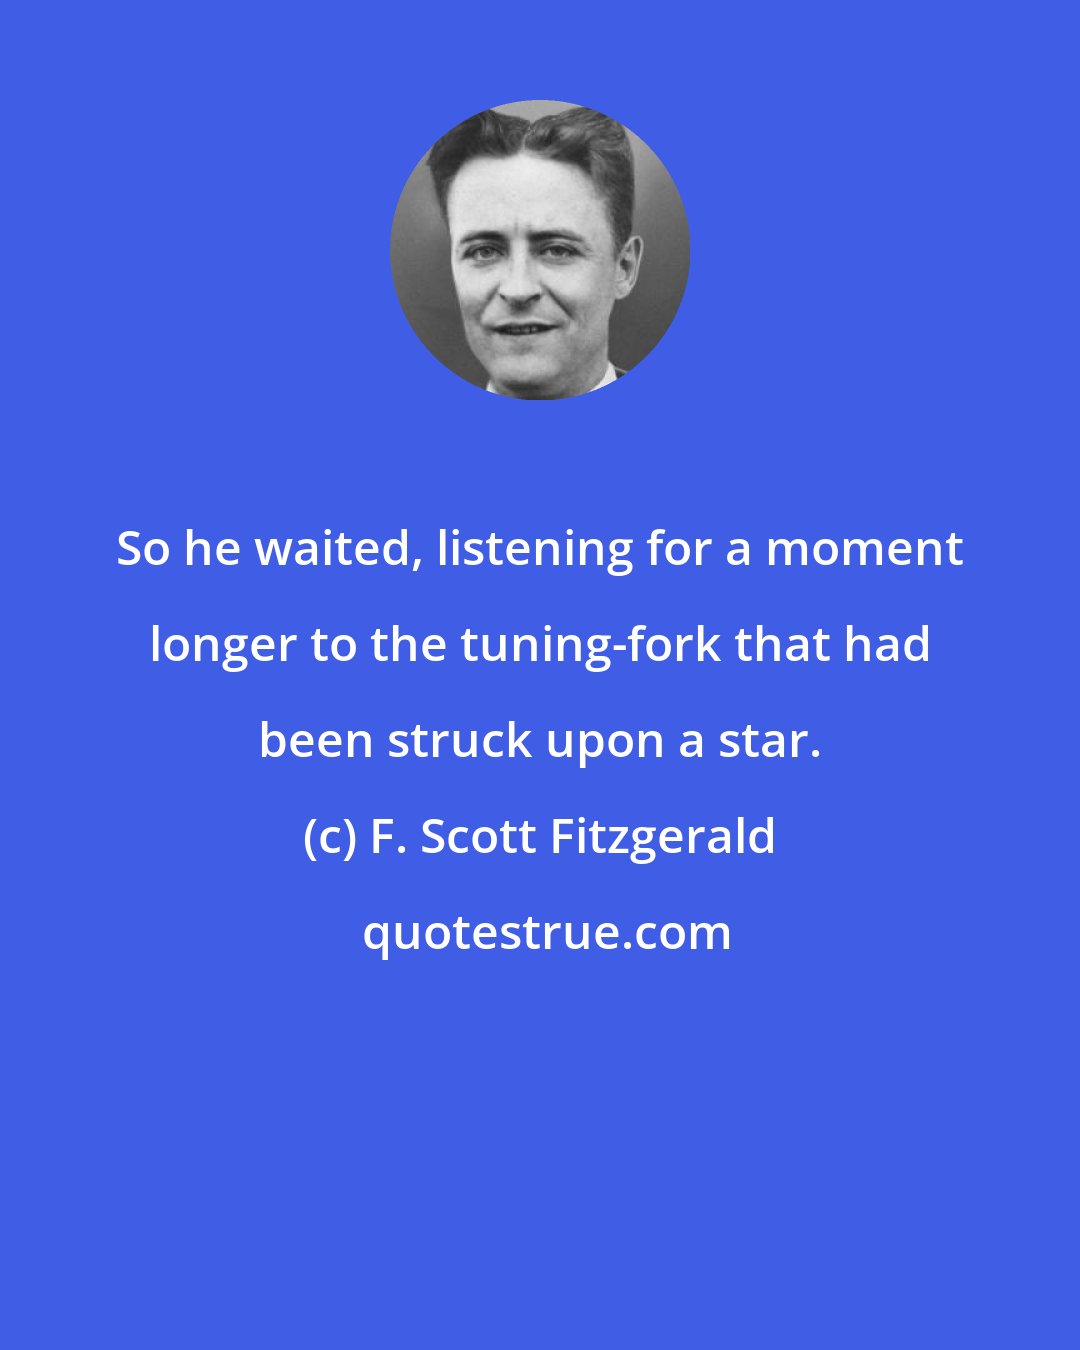 F. Scott Fitzgerald: So he waited, listening for a moment longer to the tuning-fork that had been struck upon a star.